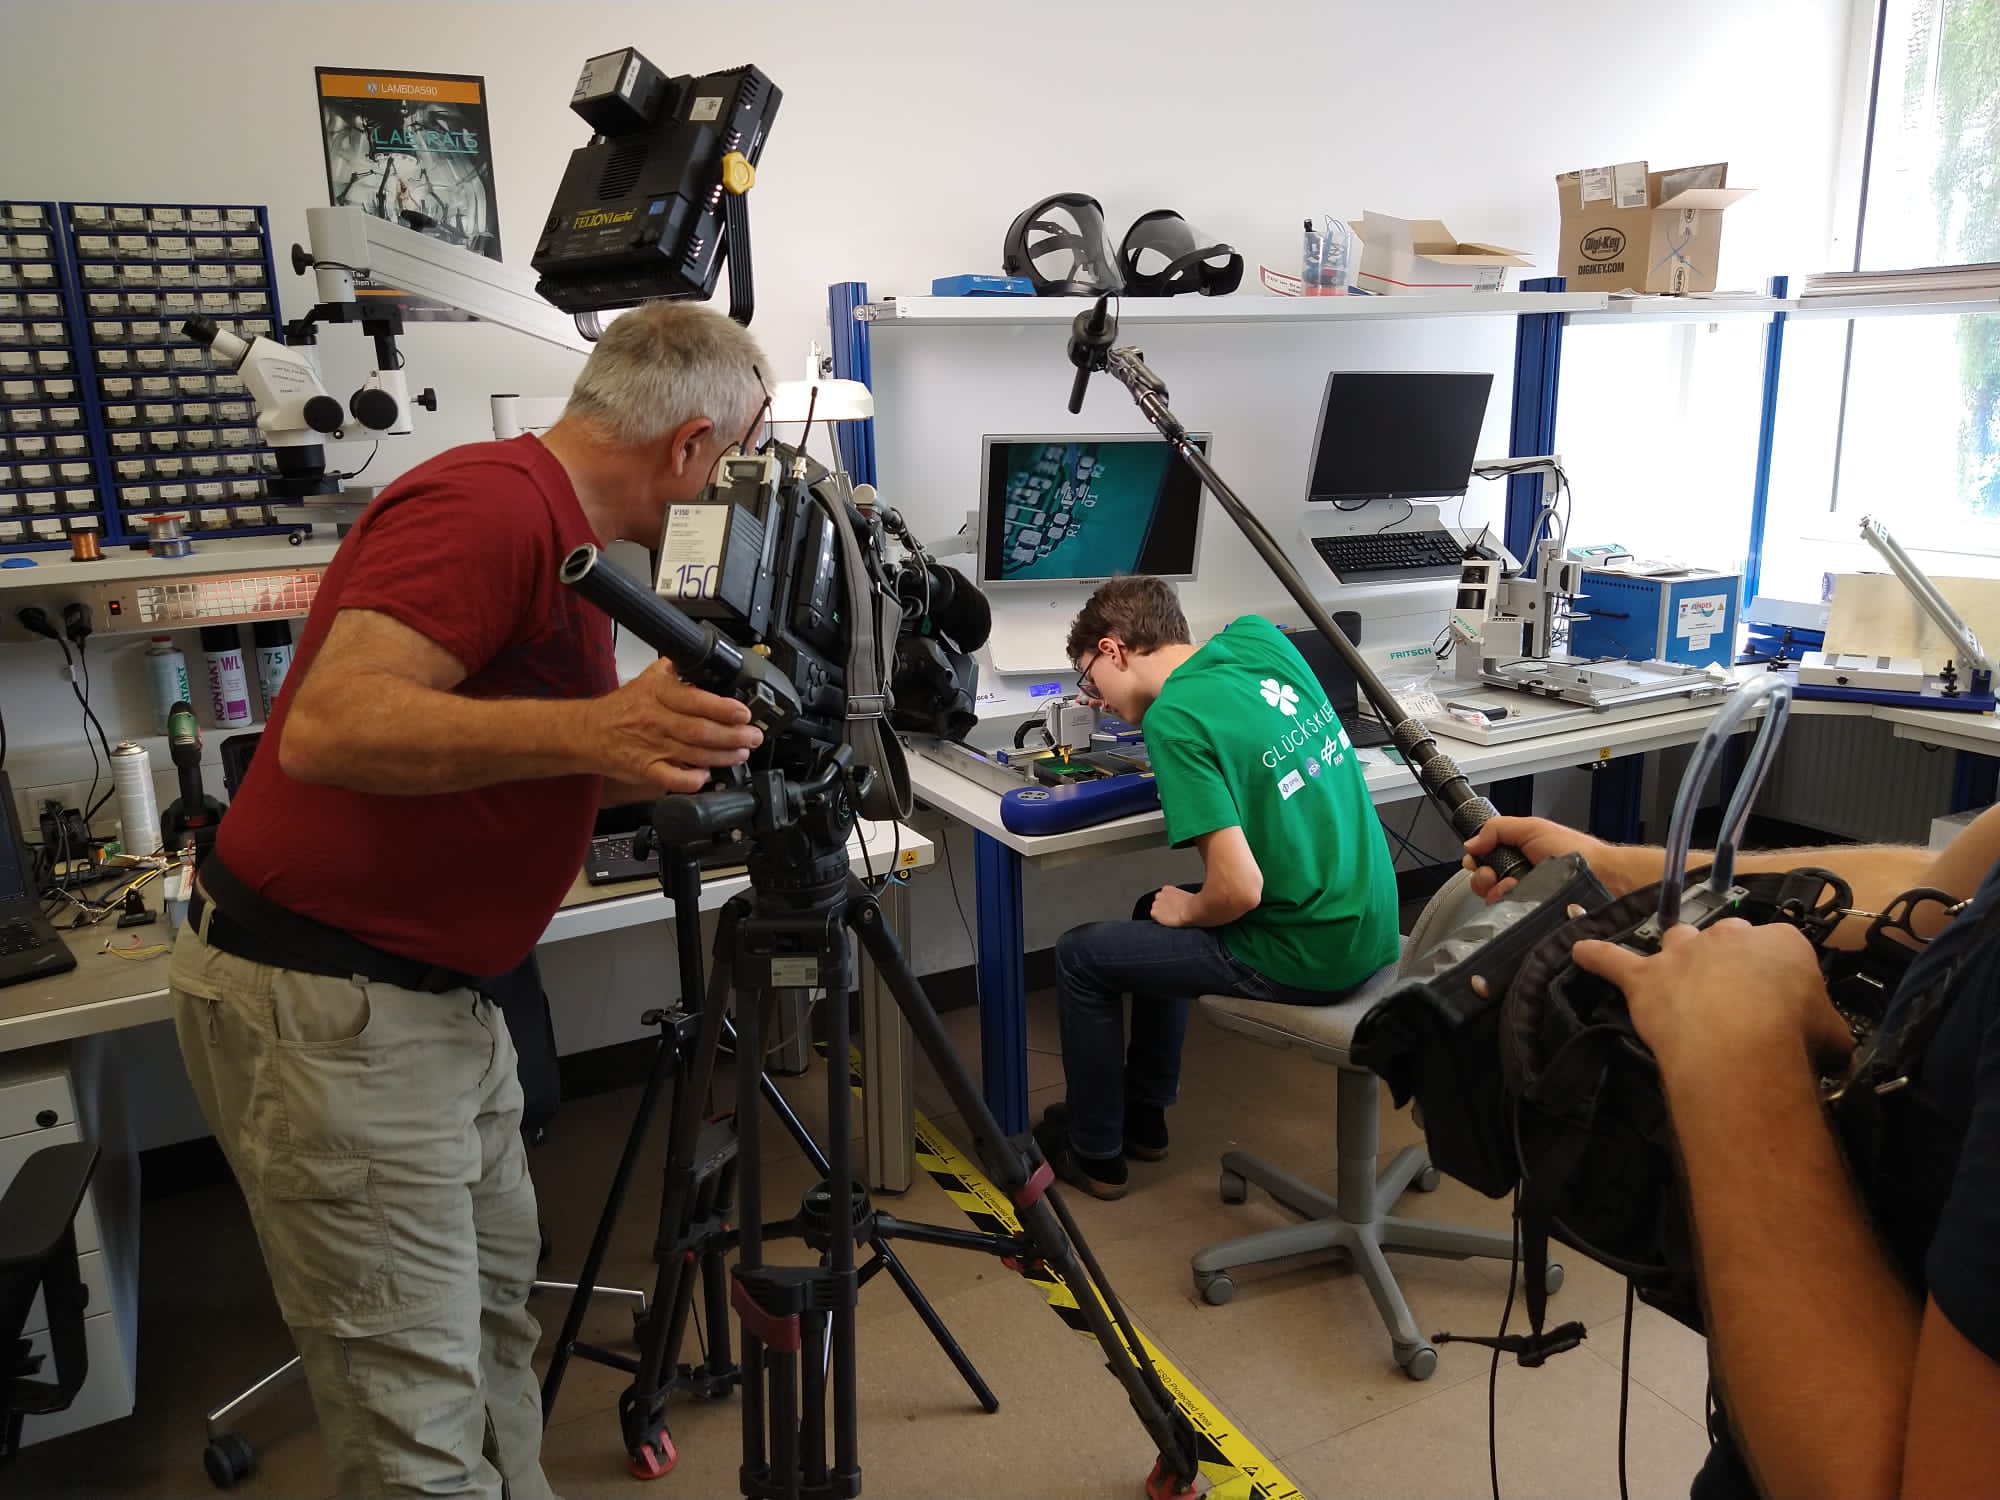 Filming the assembly of a PCB